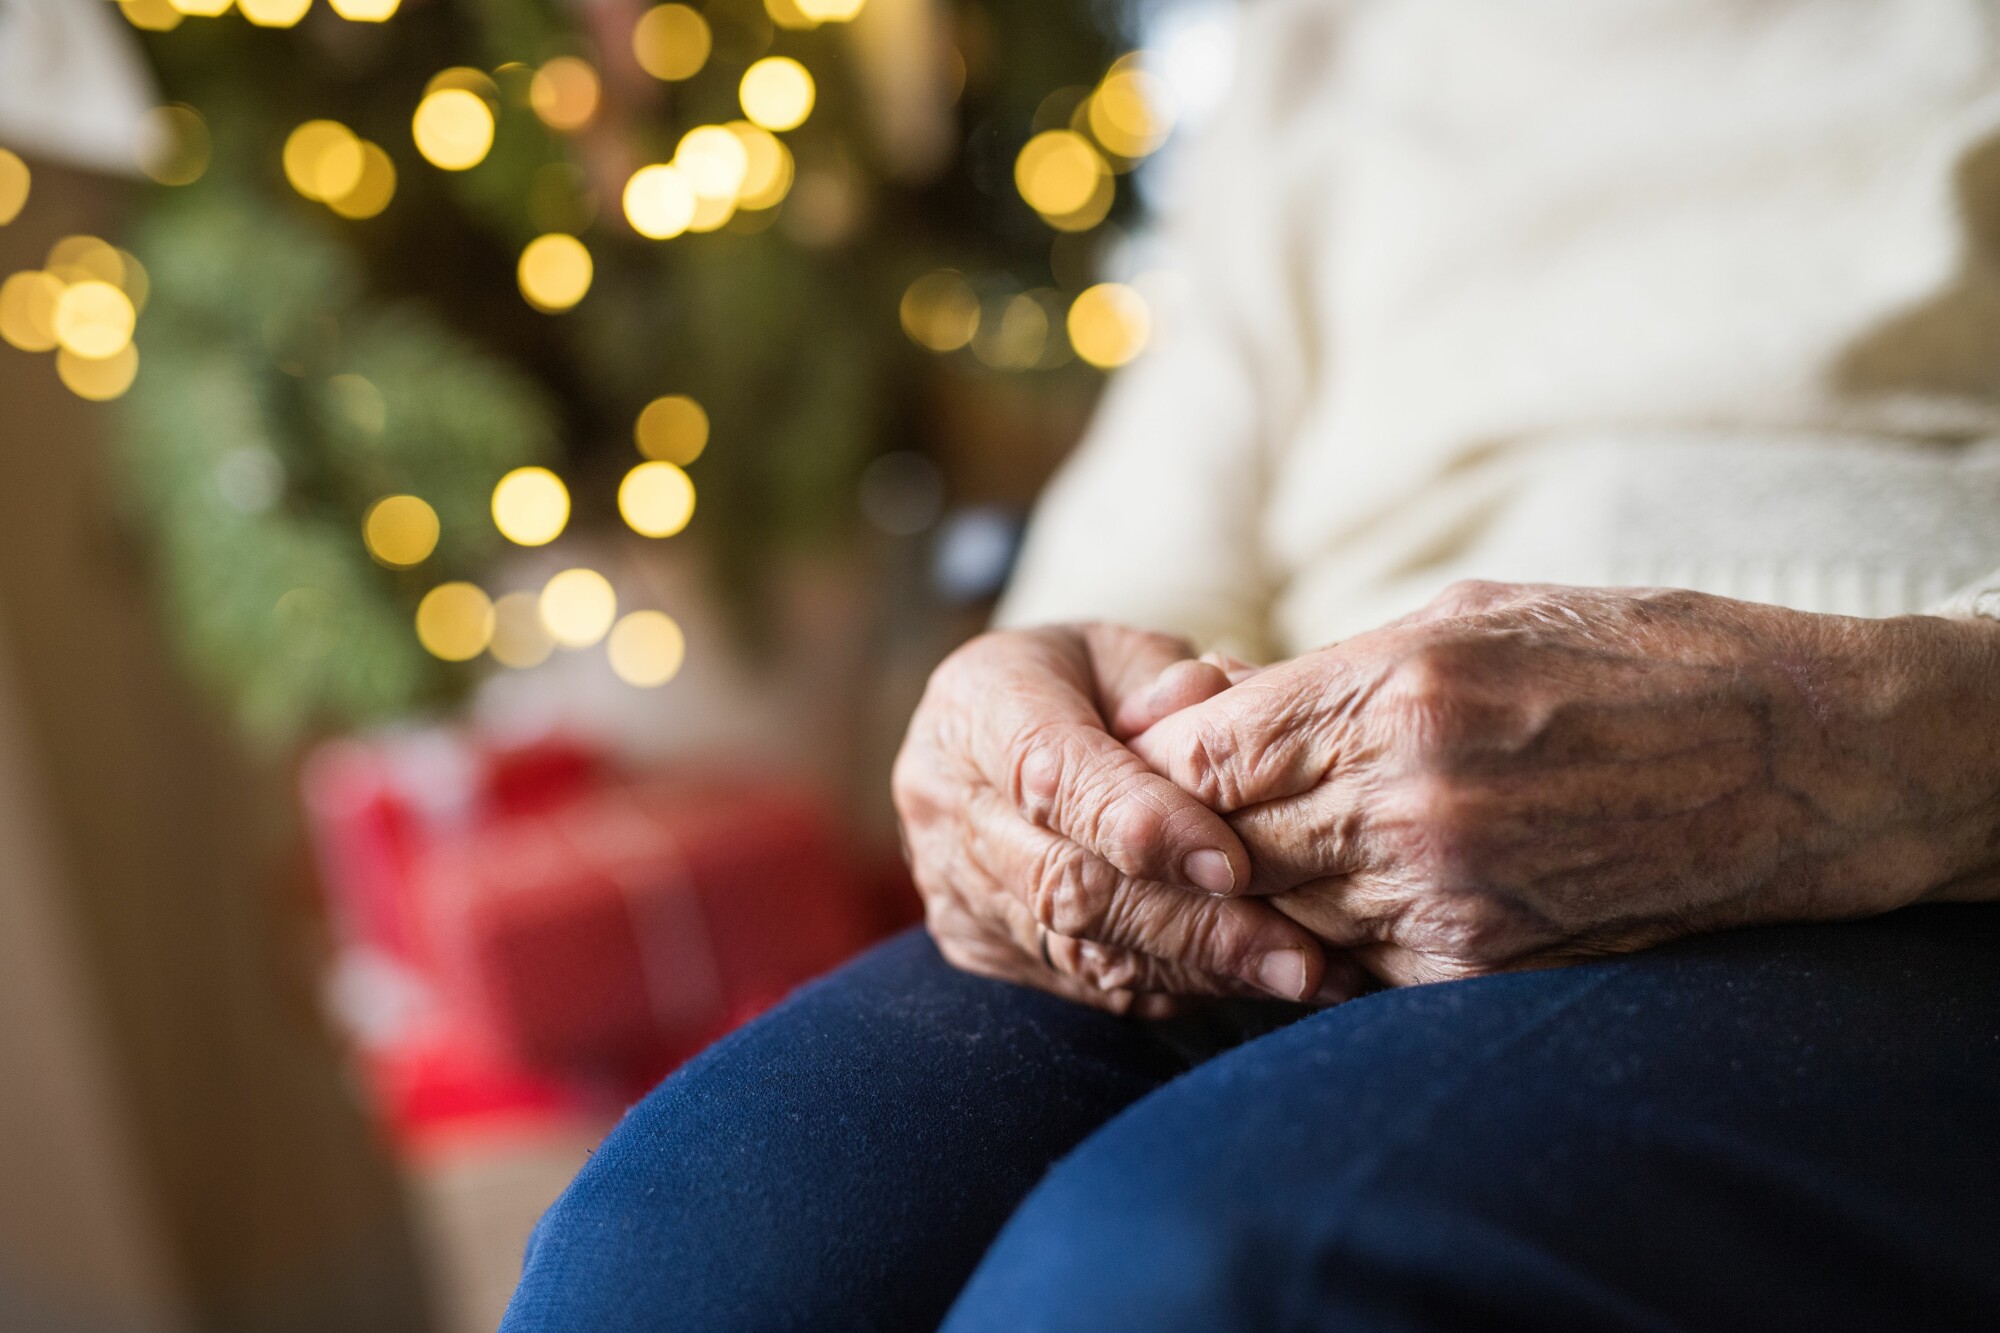 Elderly in need during the holidays